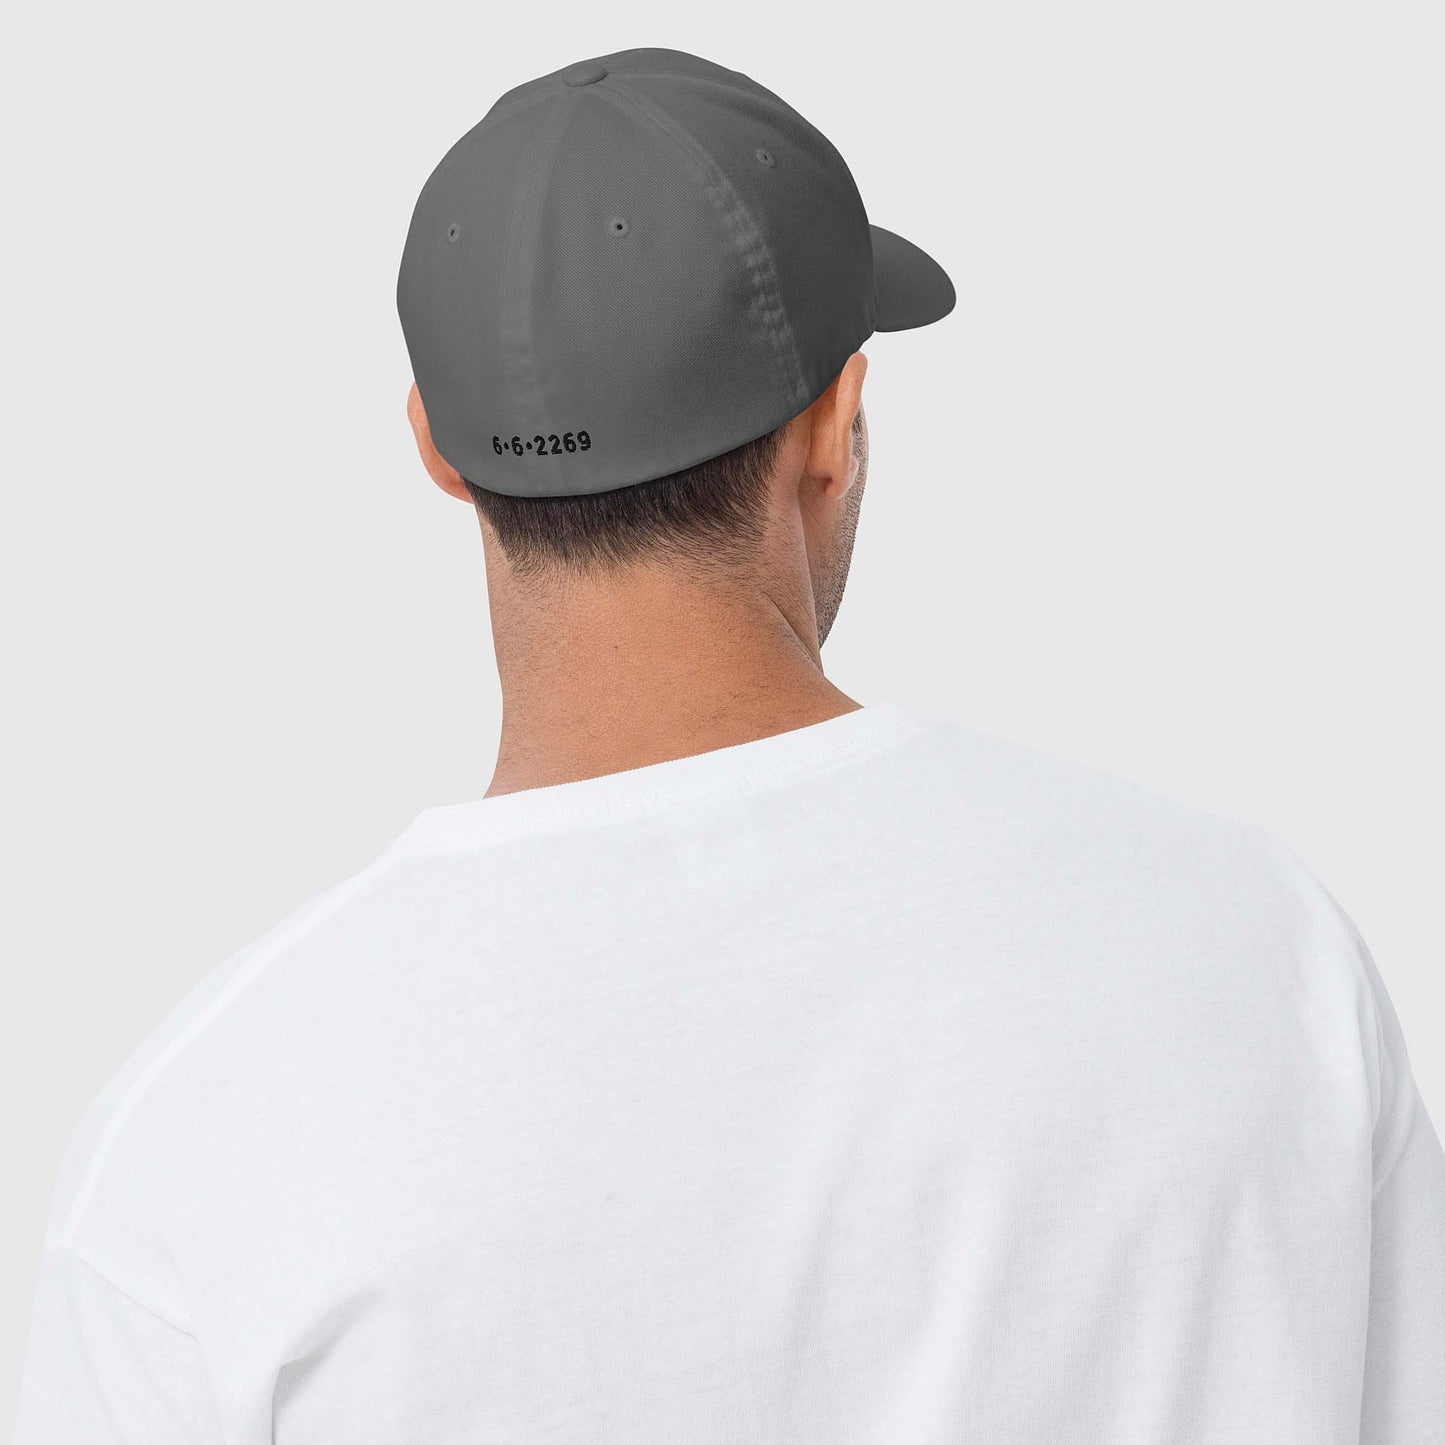 Grey fitted baseball hat with black embroidery front and back